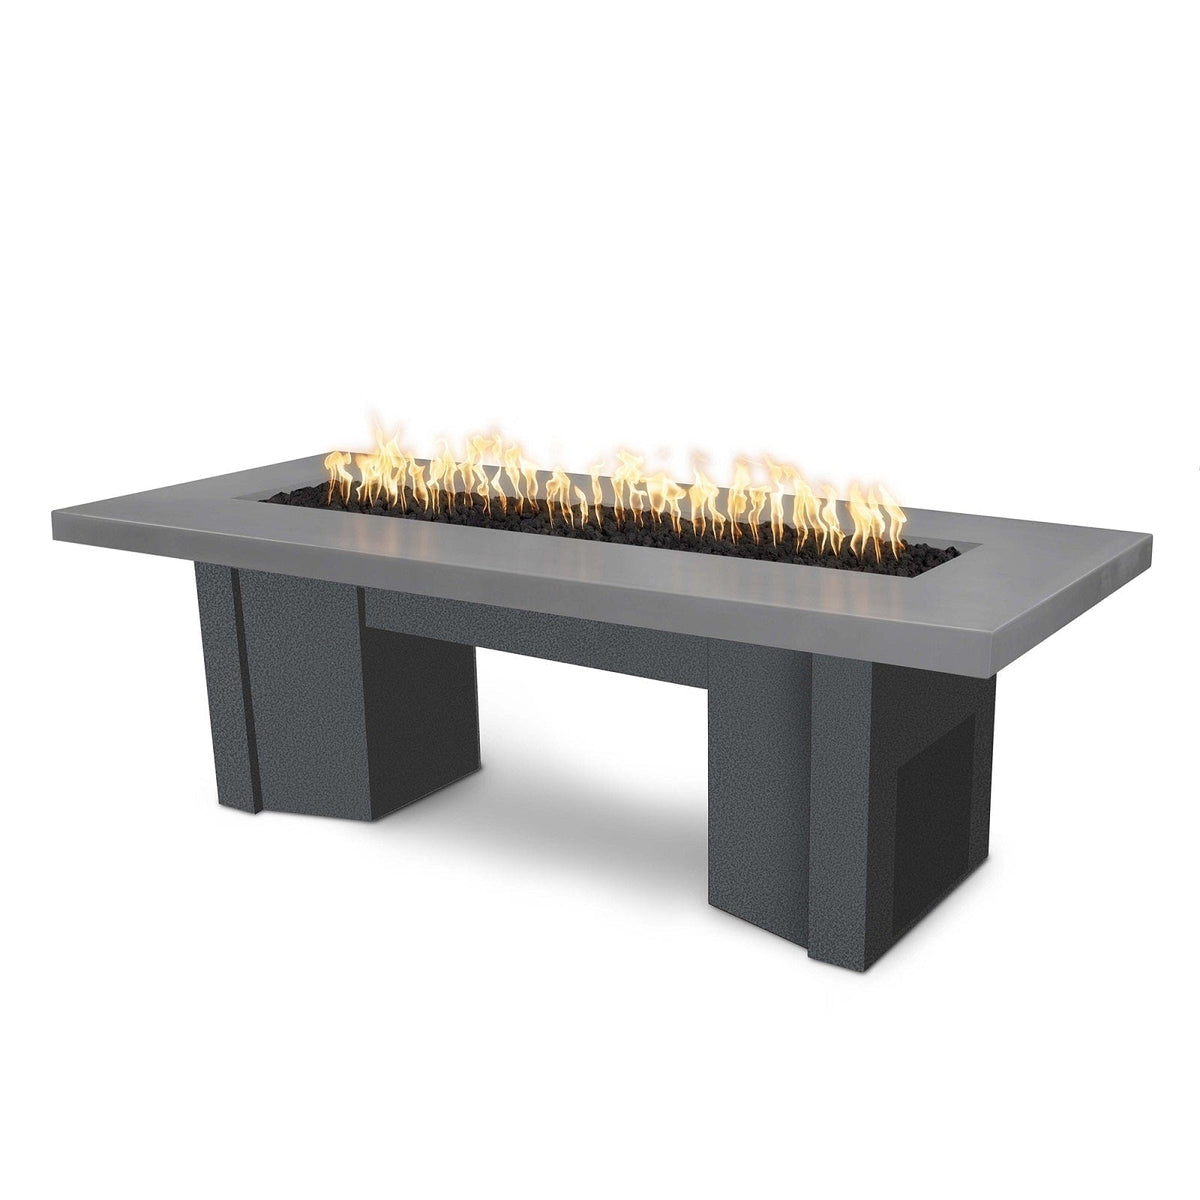 The Outdoor Plus Fire Features Natural Gray (-NGY) / Silver Vein Powder Coated Steel (-SLV) The Outdoor Plus 78&quot; Alameda Fire Table Smooth Concrete in Liquid Propane - Flame Sense System with Push Button Spark Igniter / OPT-ALMGFRC78FSEN-LP